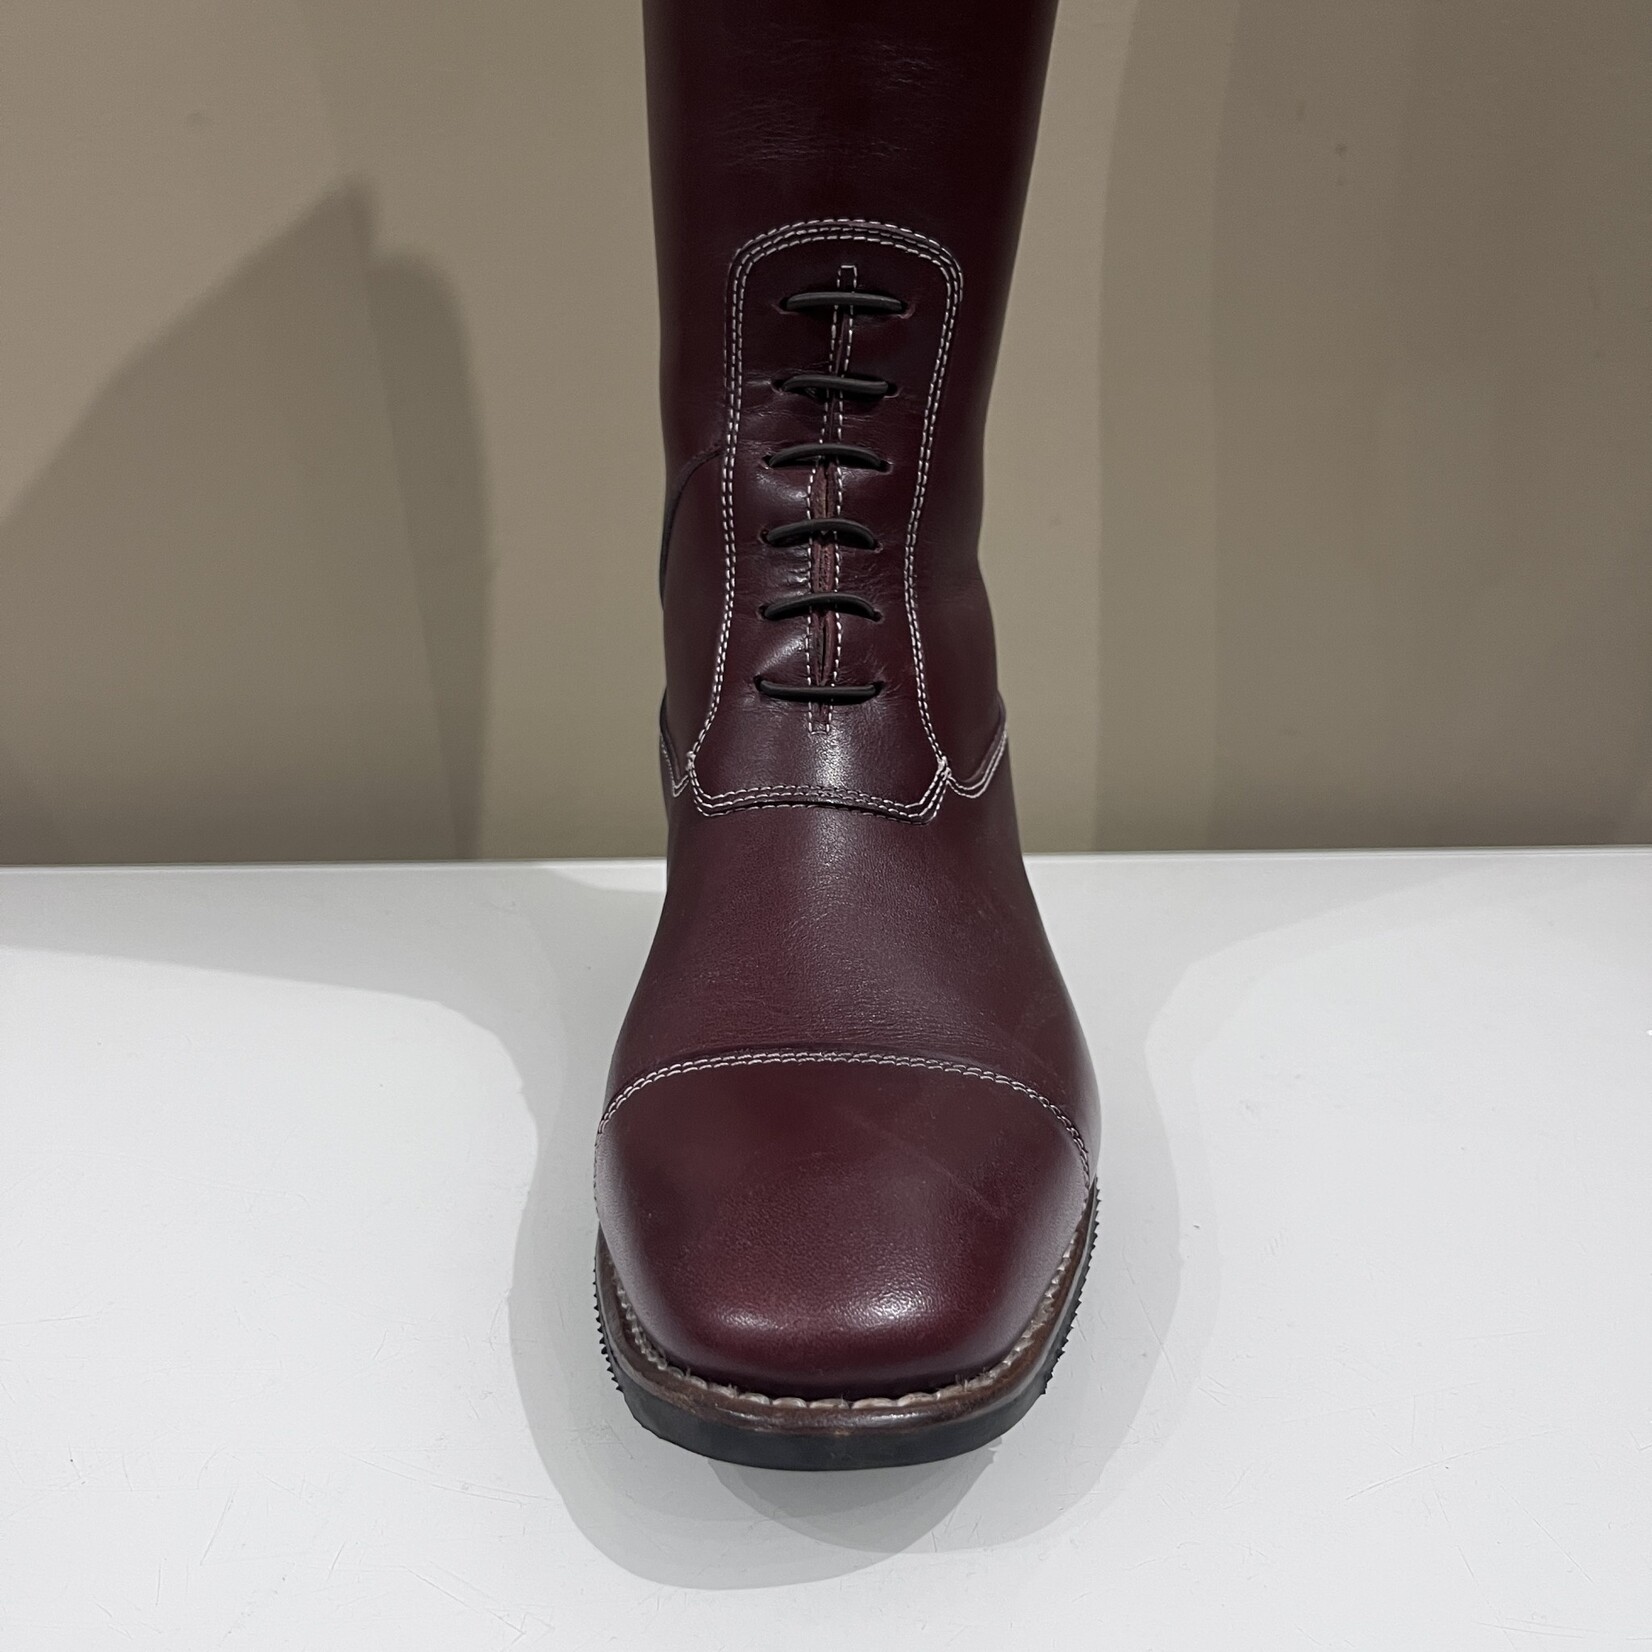 Deniro Boot DeNiro Custom S3602 Field Boot in Mosto Leather, Top in Rondine, Upper Top in Pitone Prugna with Contrast Stitching in Pink and Toe Cap Piping and Zip Cages in Brushed Burgundy, 39 MA L